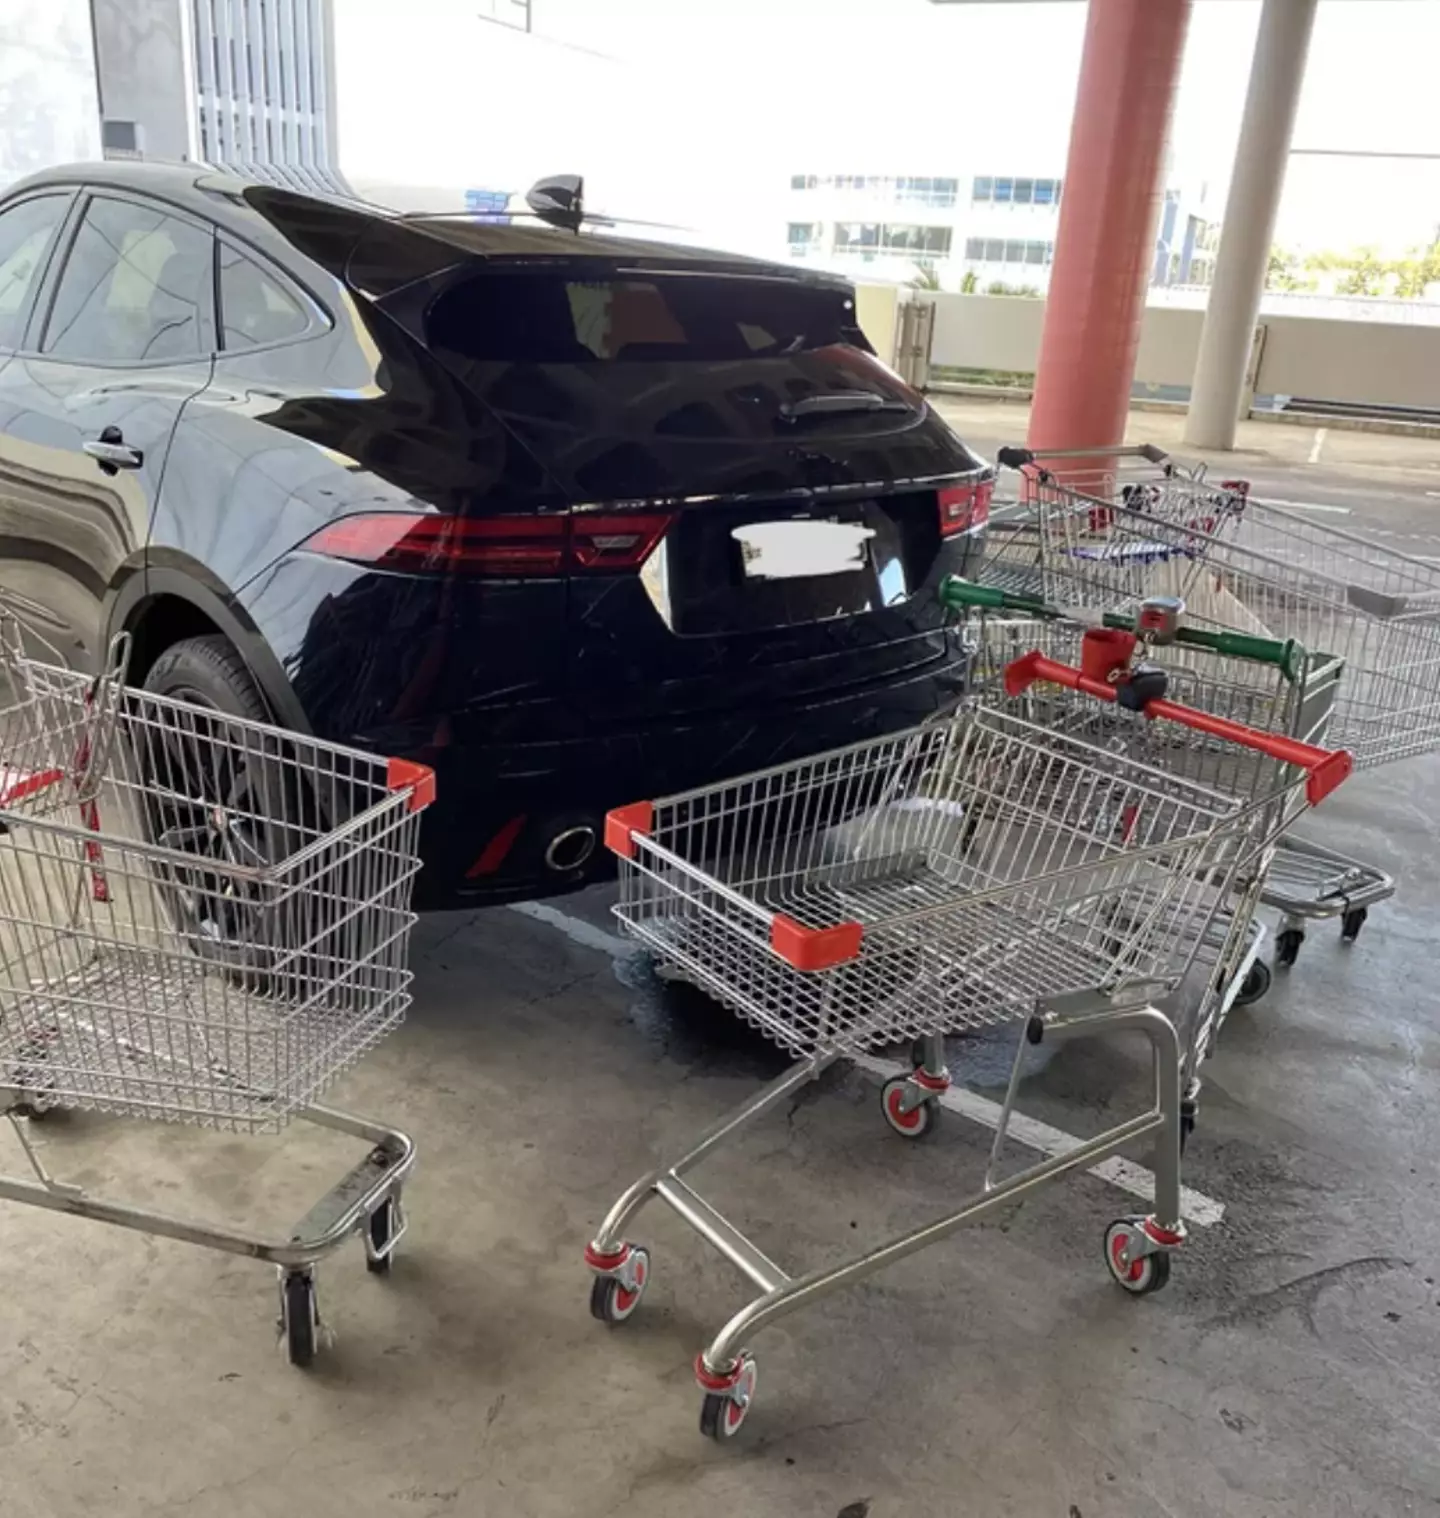 Shoppers didn't hesitate to get involved in the revenge.